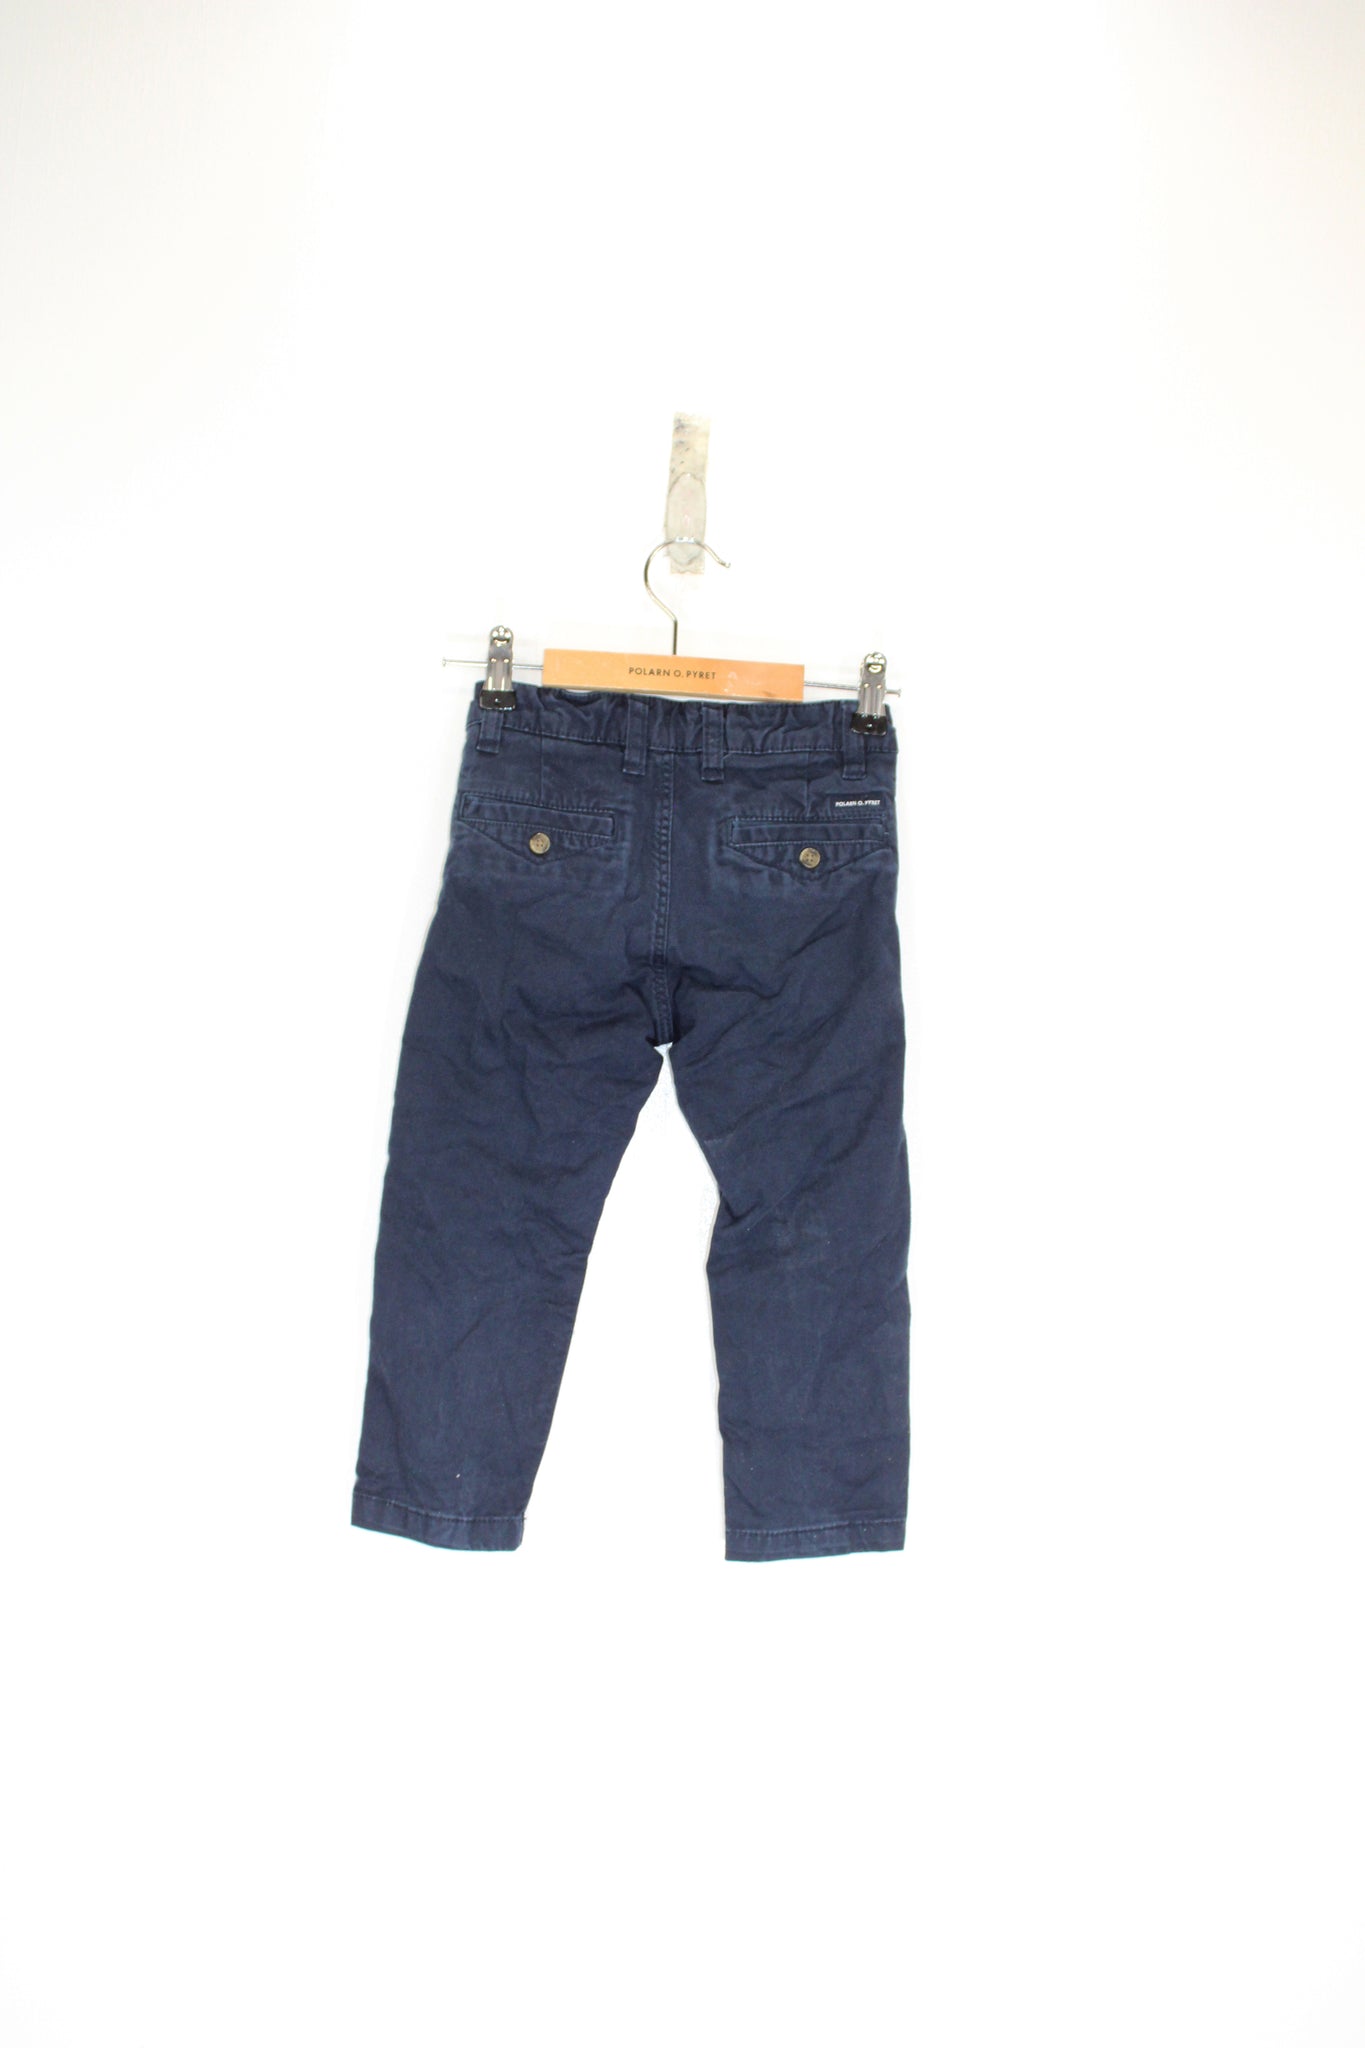 Kids Chinos Trousers 2-3y / 98